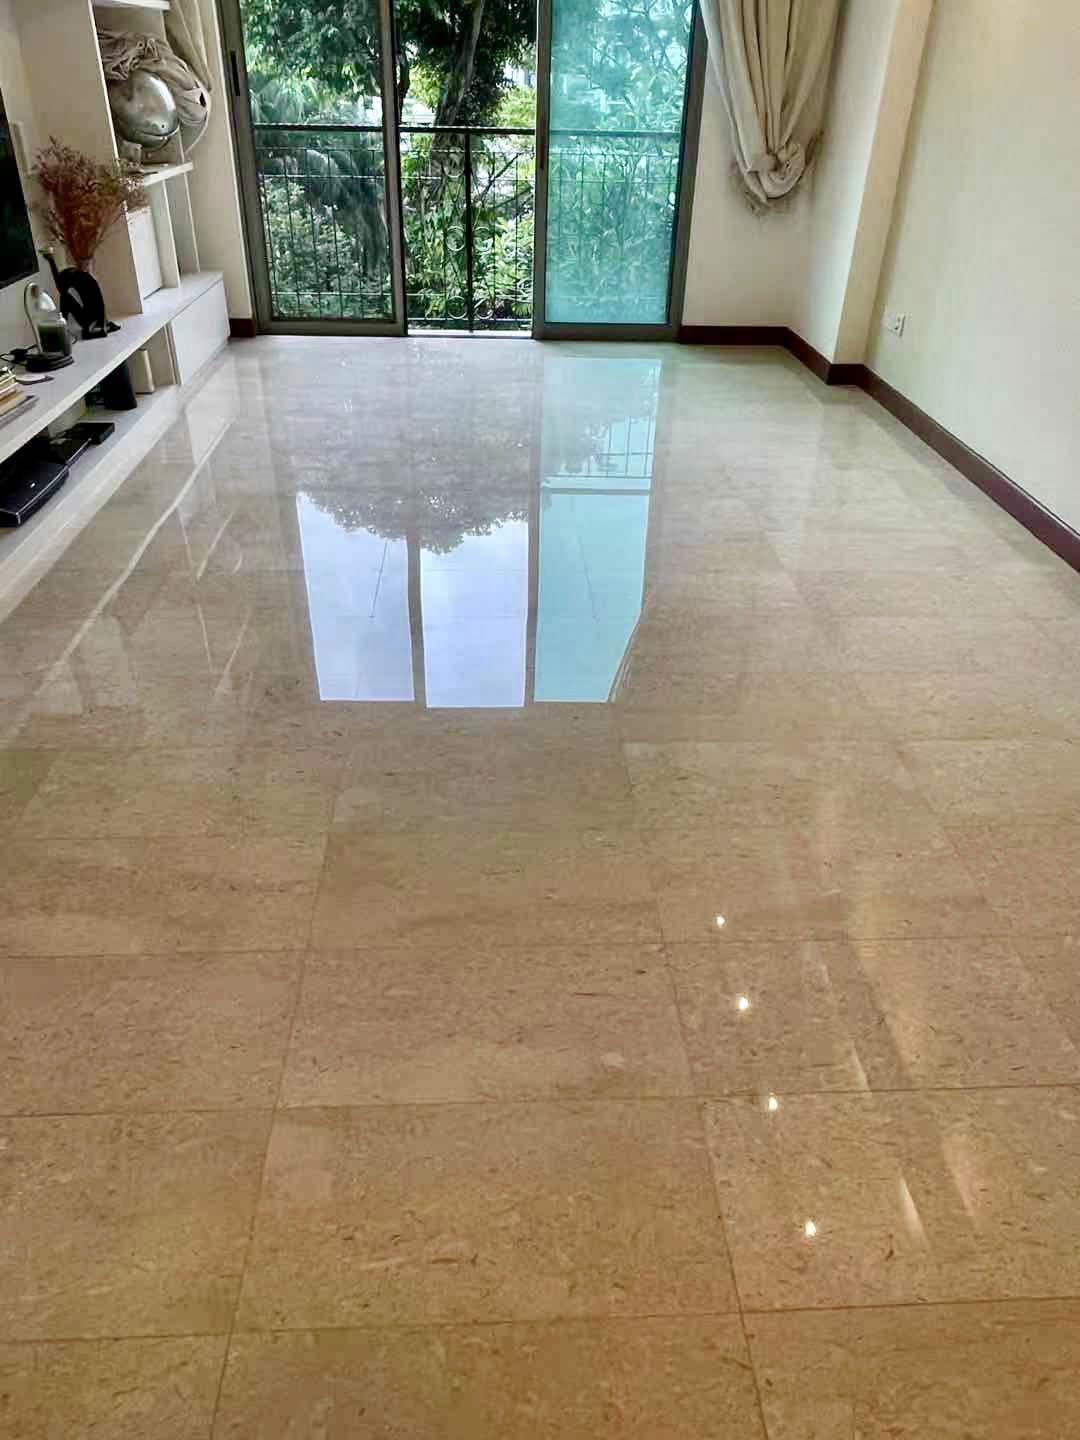 House Renovation, Marble Polishing Services, Floor Cleaning Selangor KL.